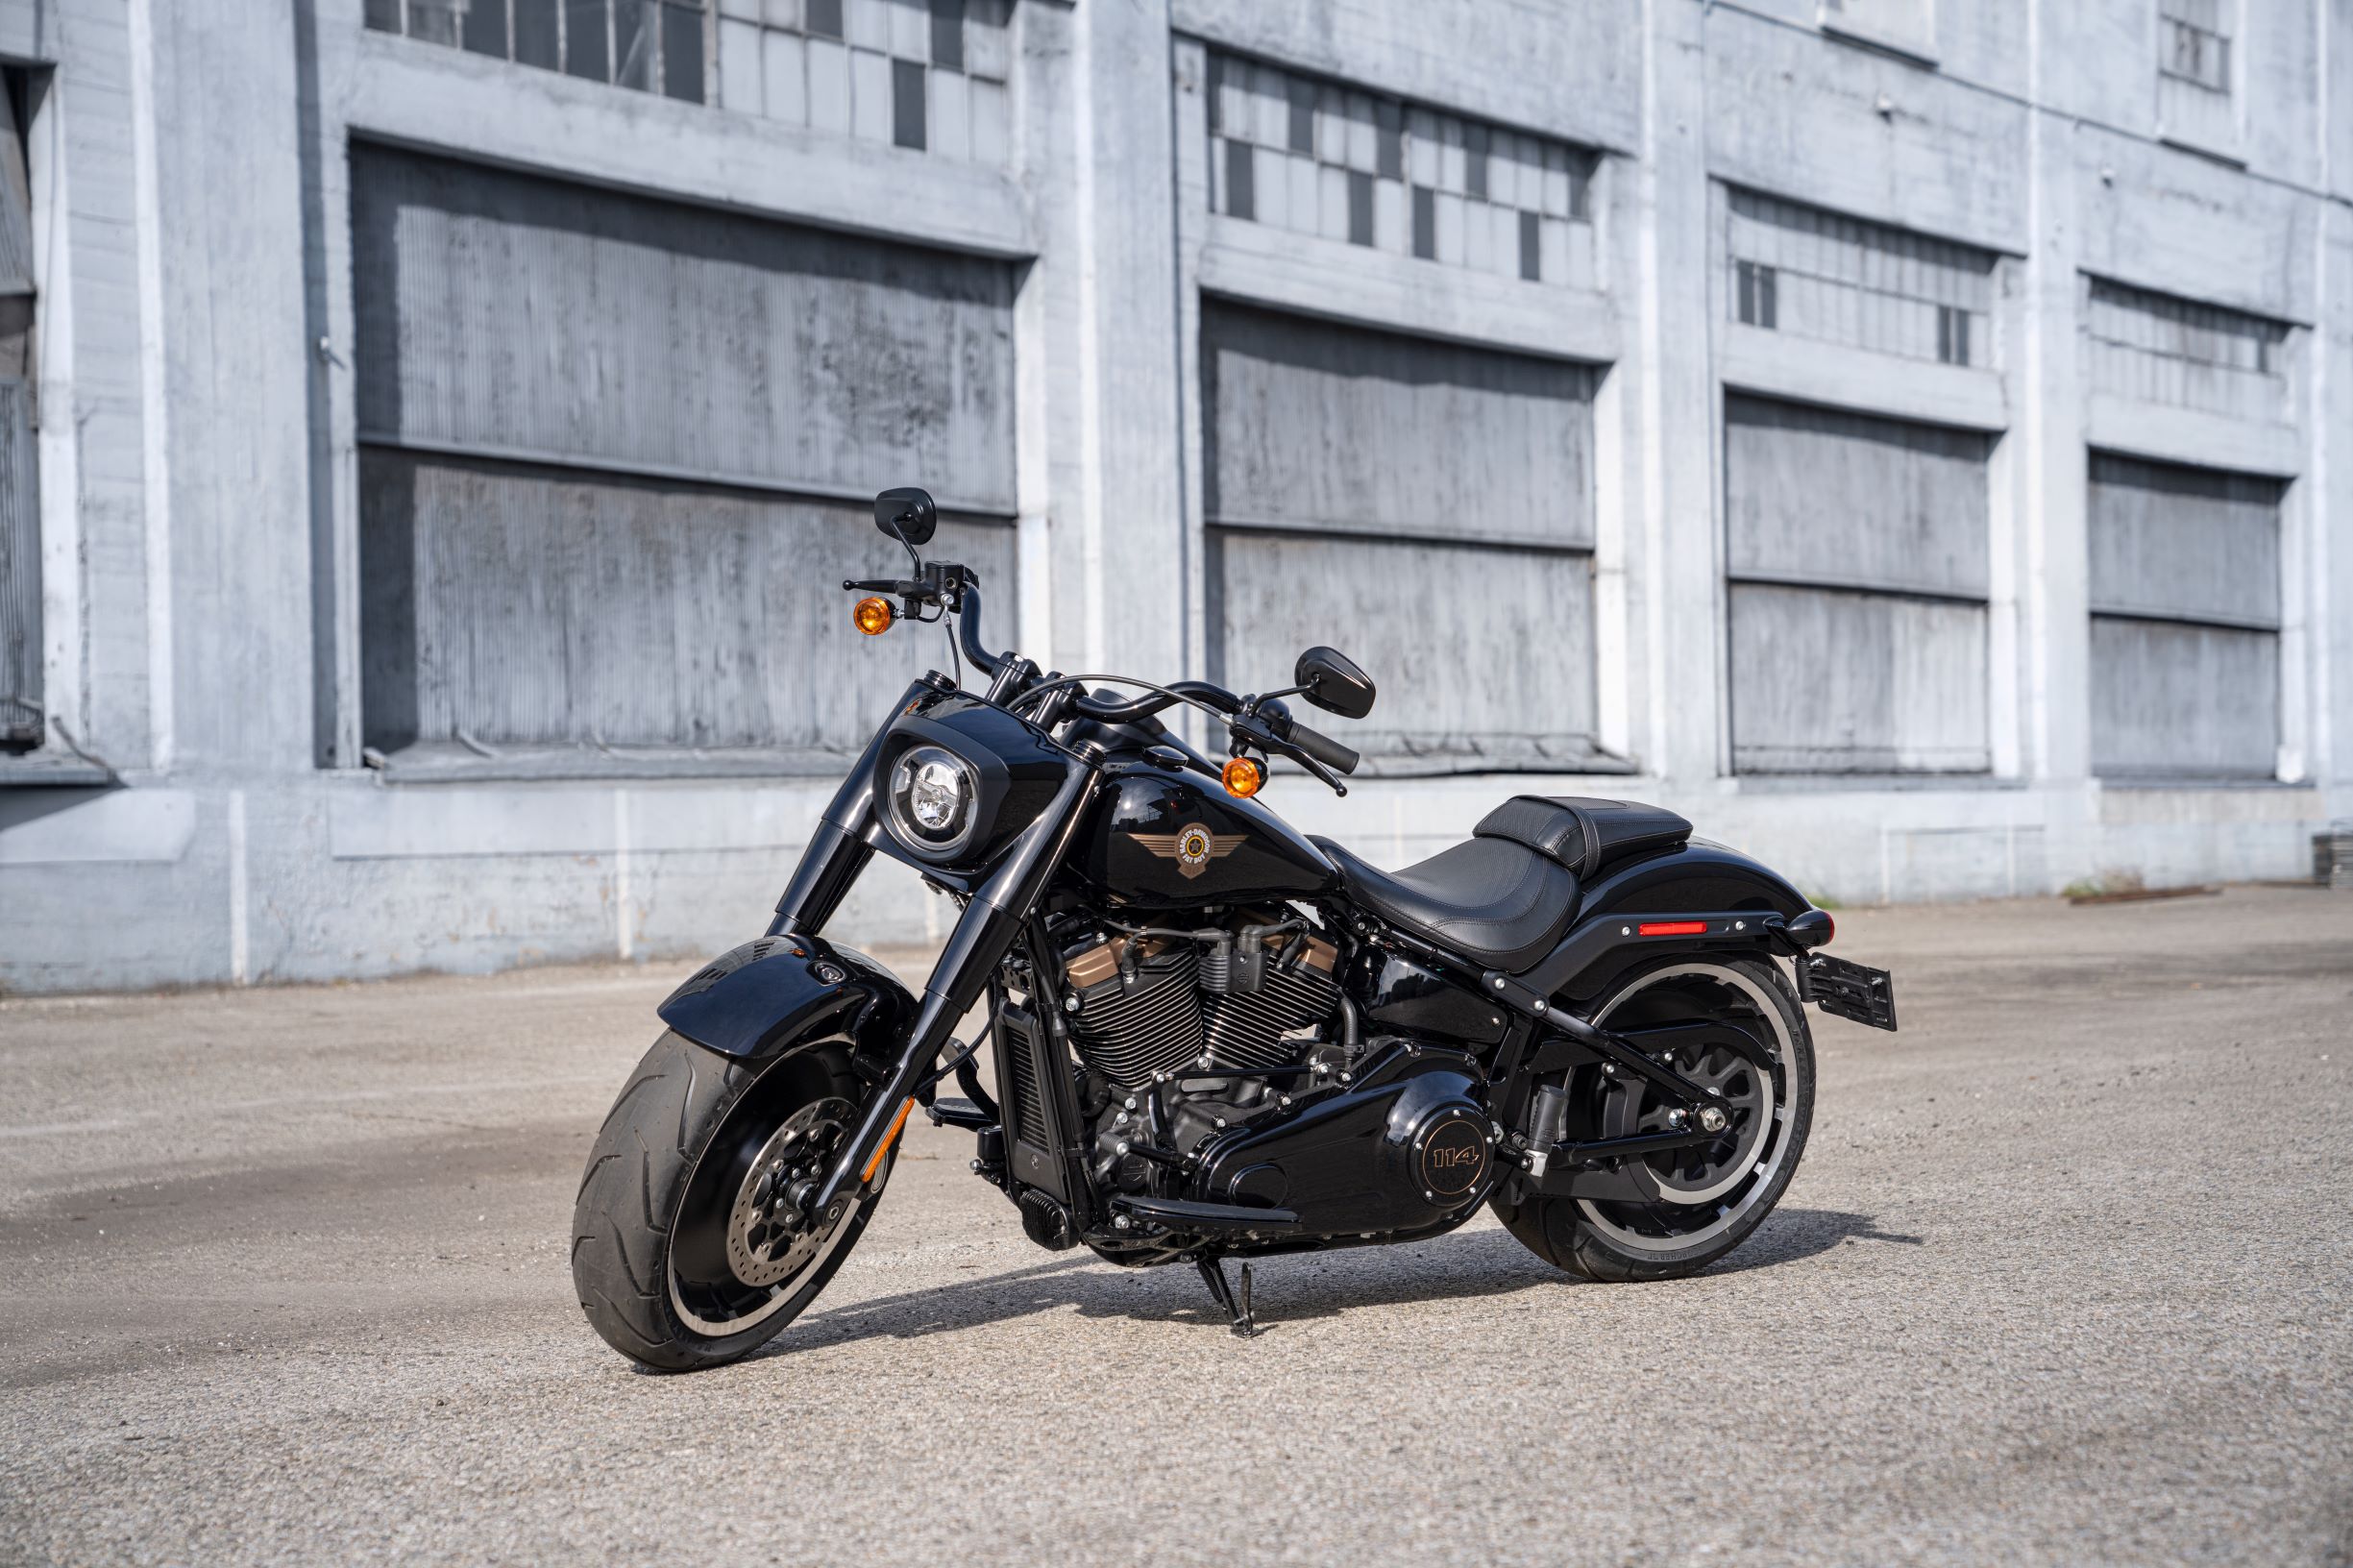 HarleyDavidson Celebrates 30 Years of Iconic Fat Boy With Special